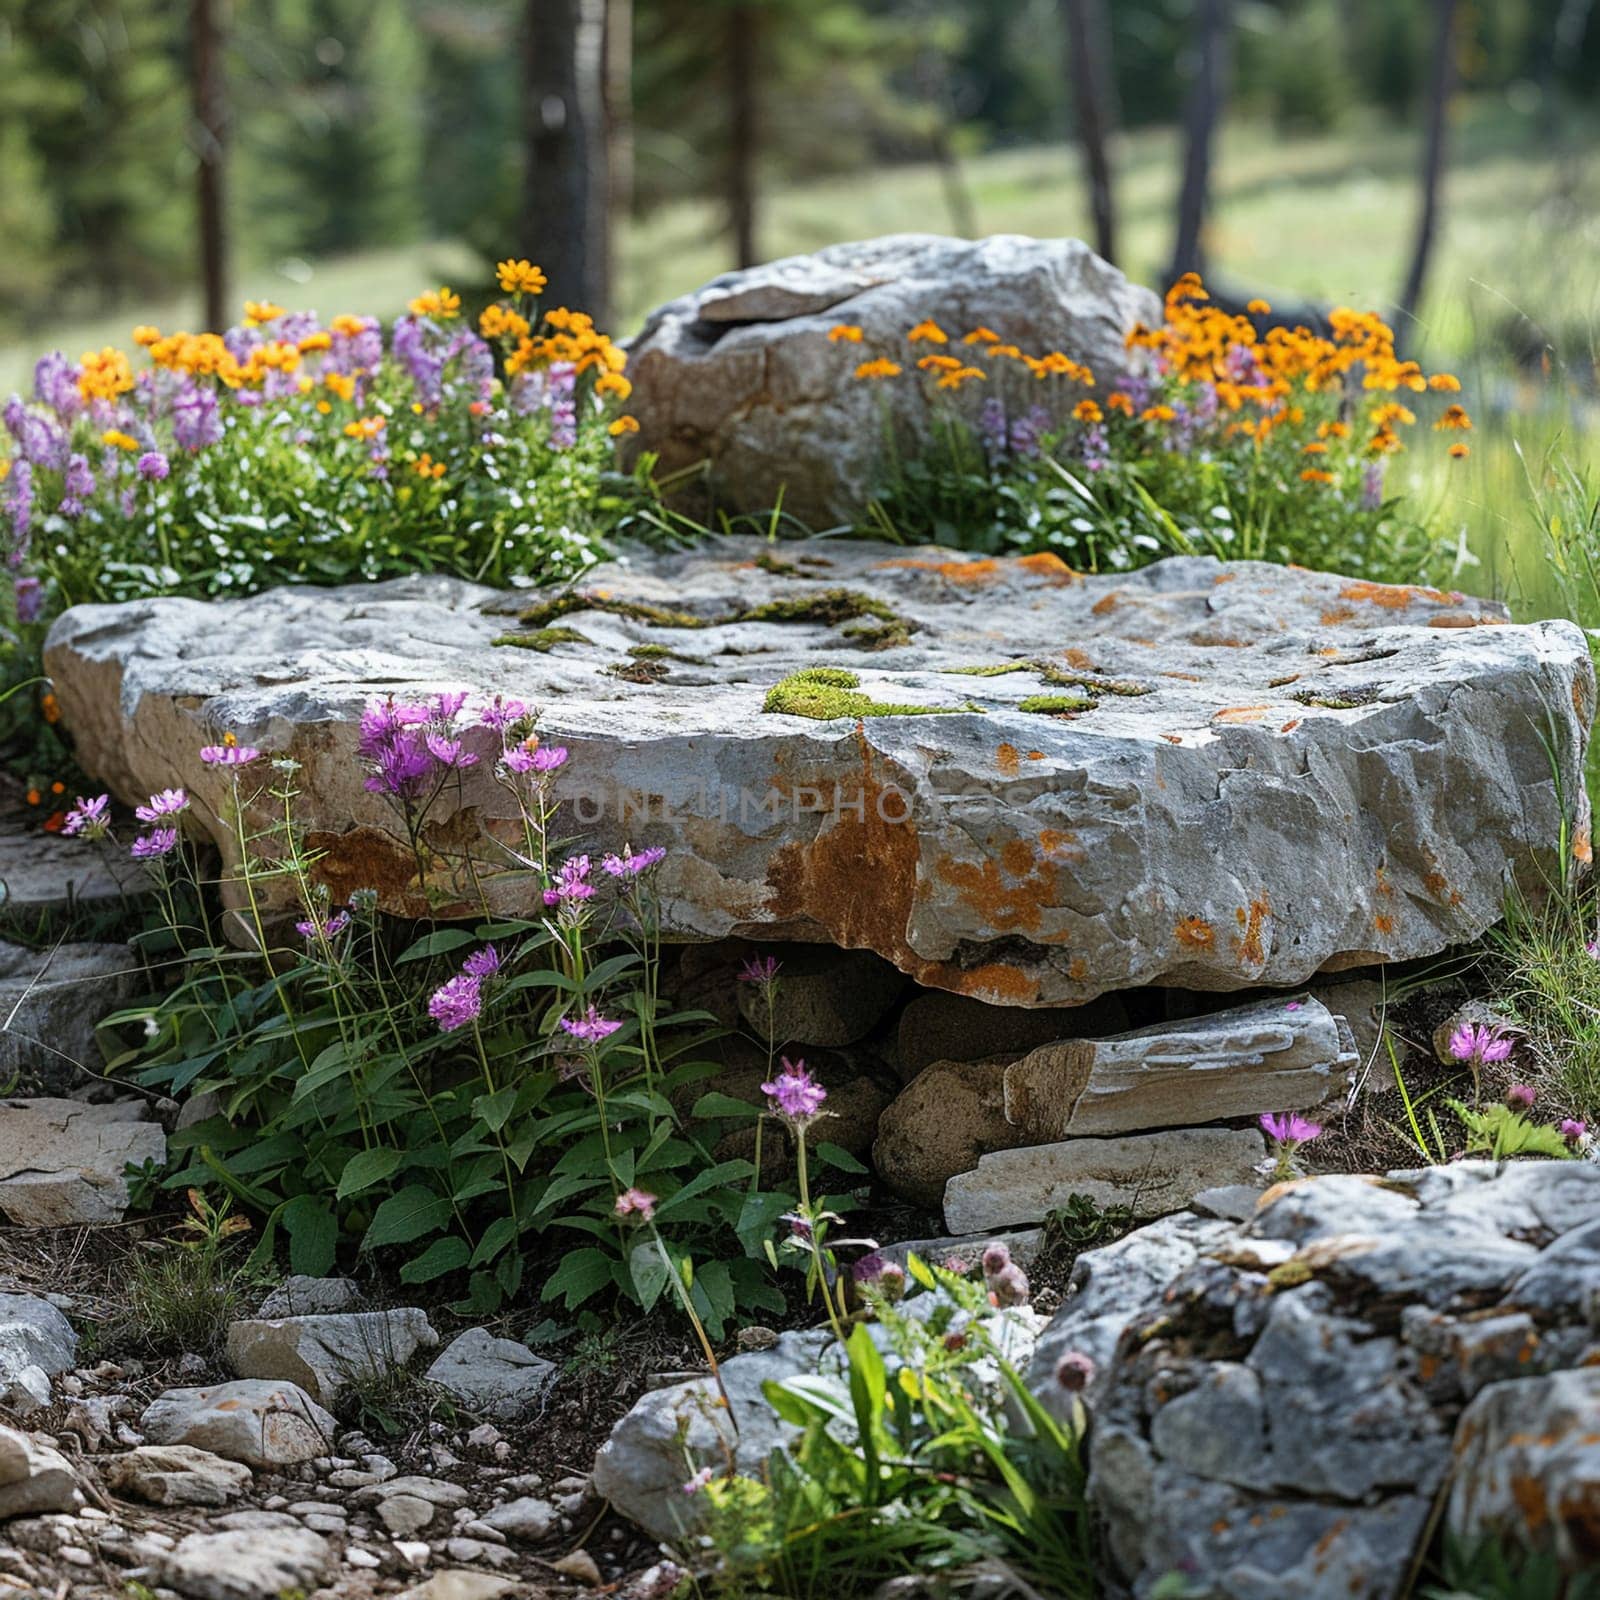 Rustic Stone Plinth Surrounded by Wildflowers and Greenery, The natural textures blur into an outdoor, organic environment, perfect for eco-friendly products.